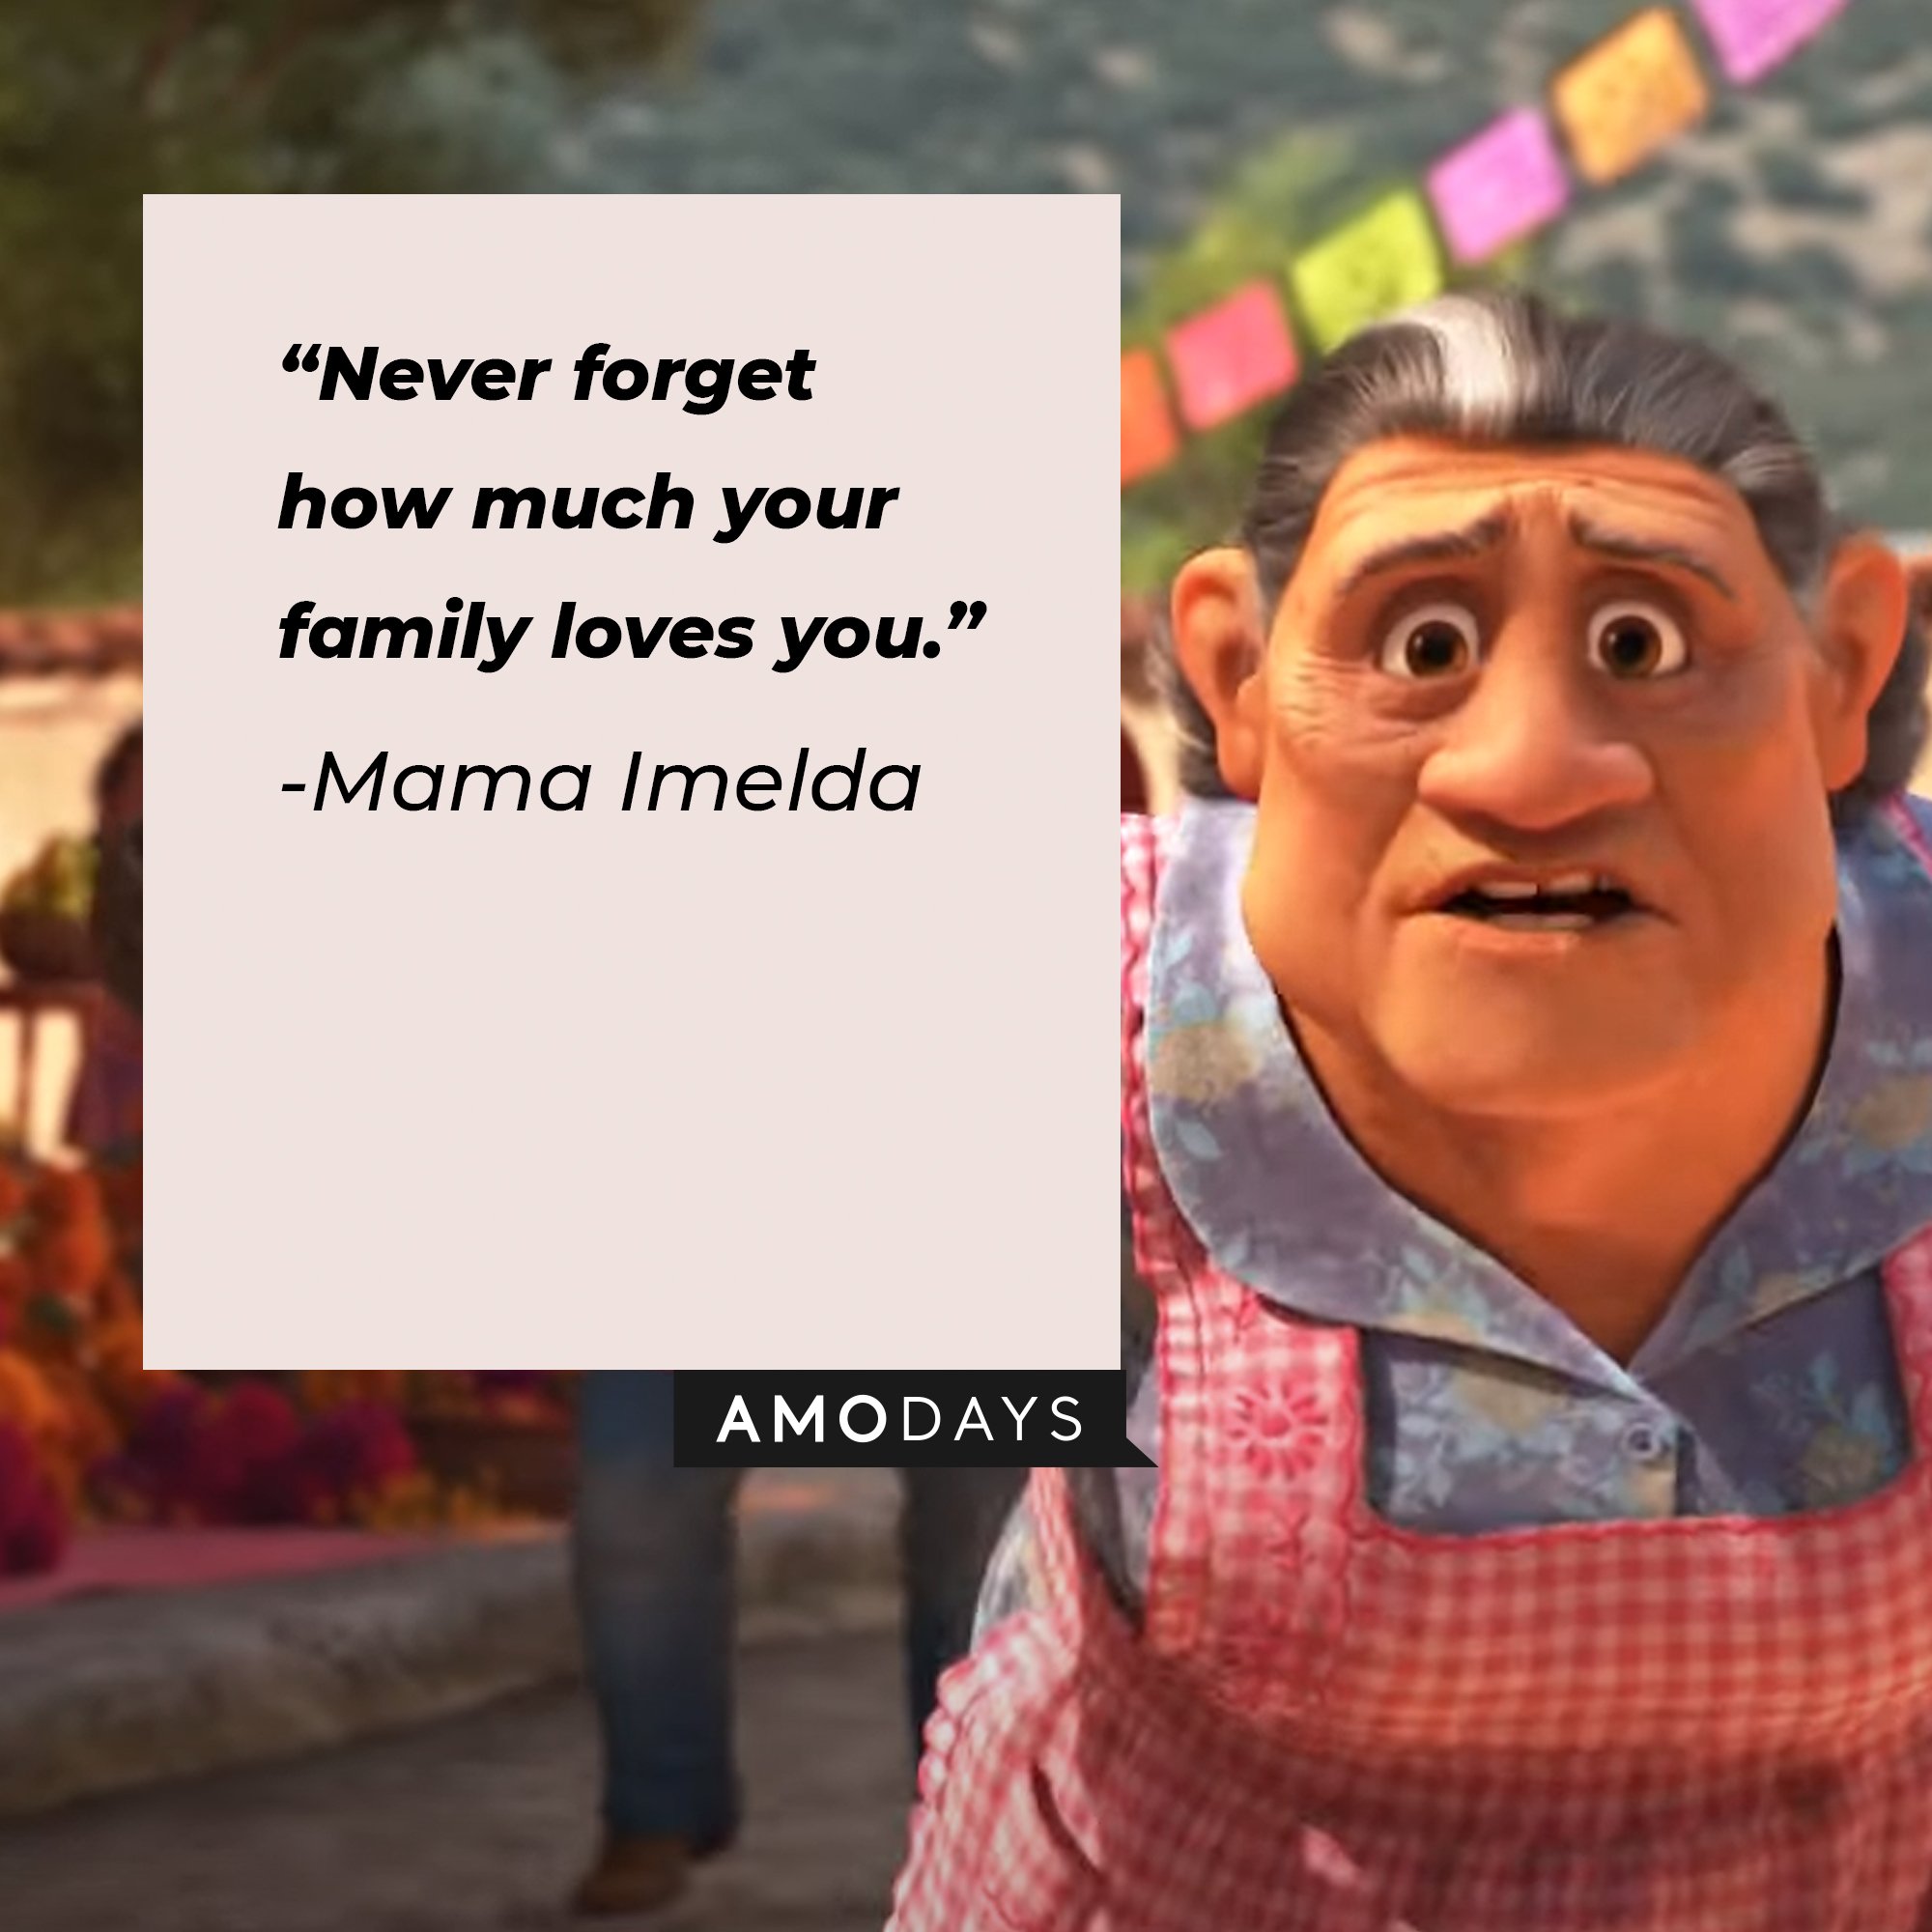 Mama Imelda's quote: “Never forget how much your family loves you.” | Image: AmoDays